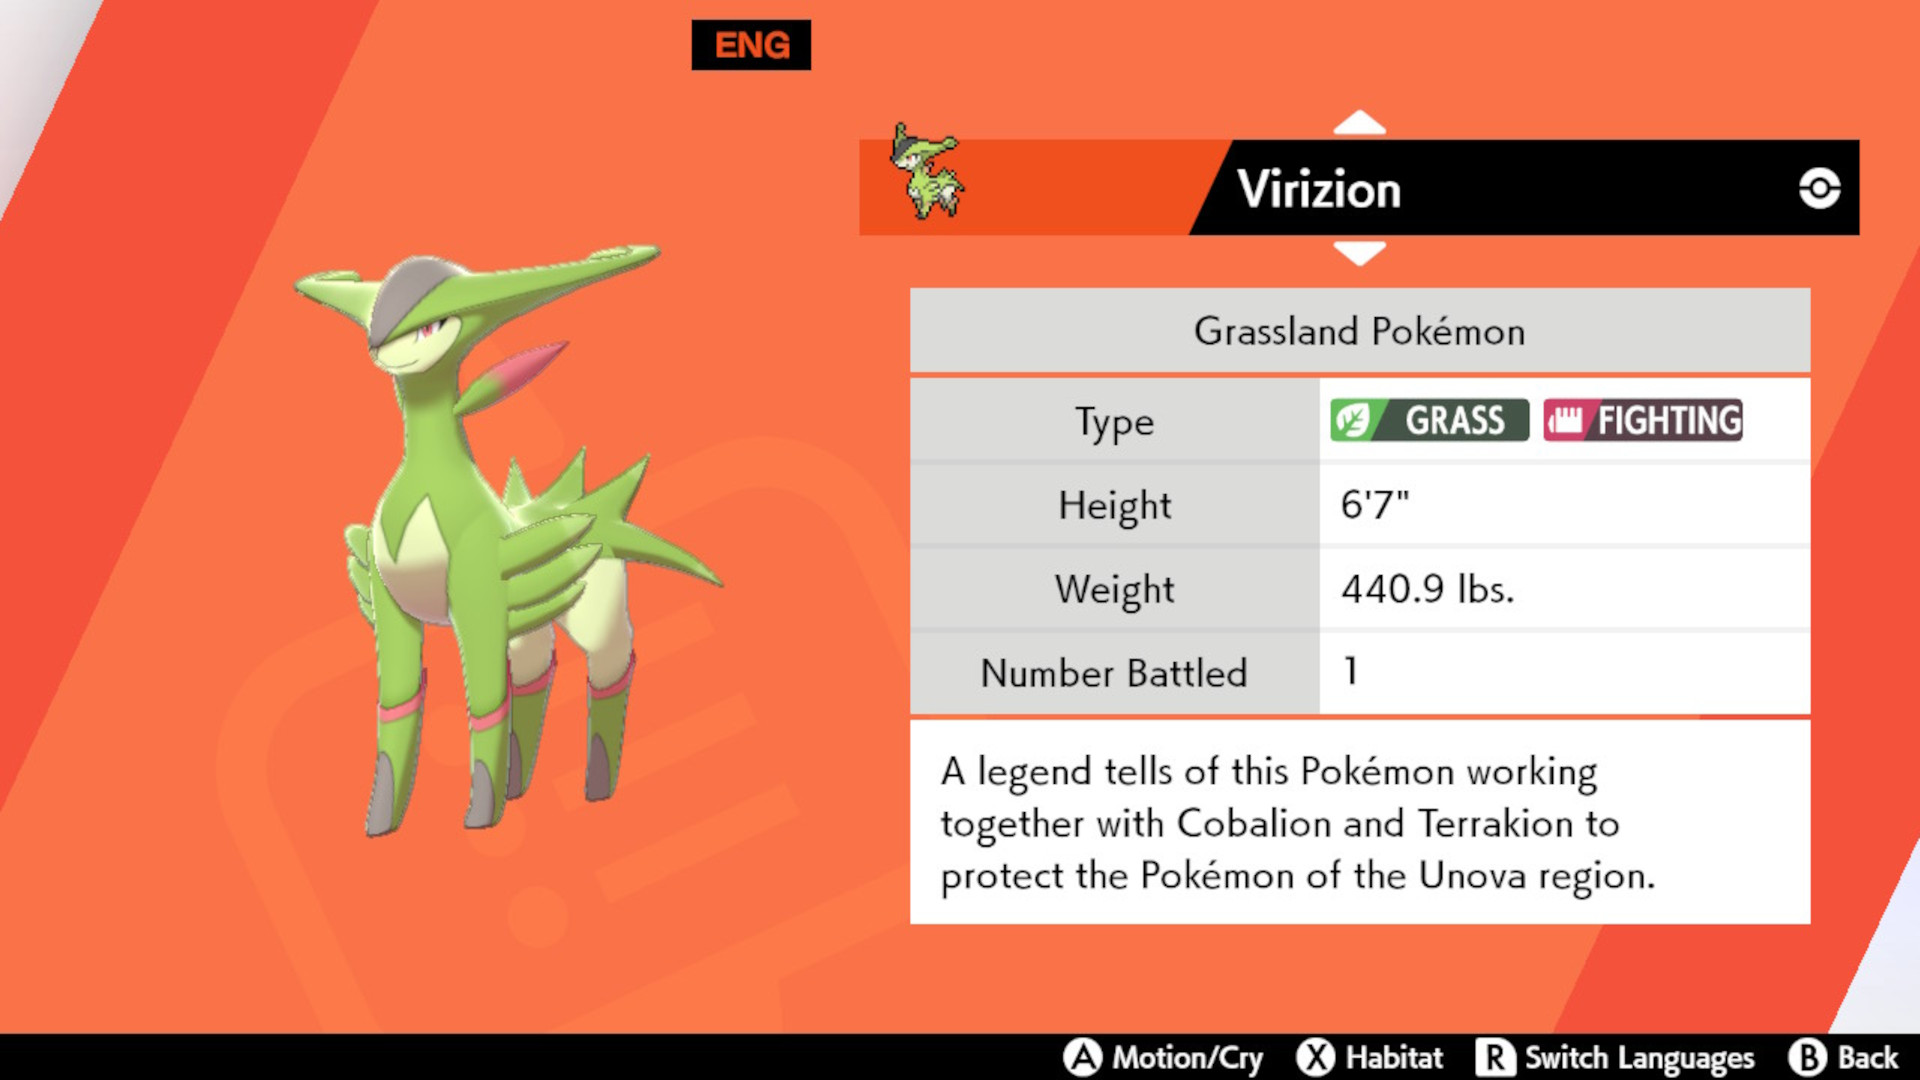 Pokémon Sword and Shield The Crown Tundra footprint Virizion: The stats page for Virizion, showing the grassland creature standing on the left side.